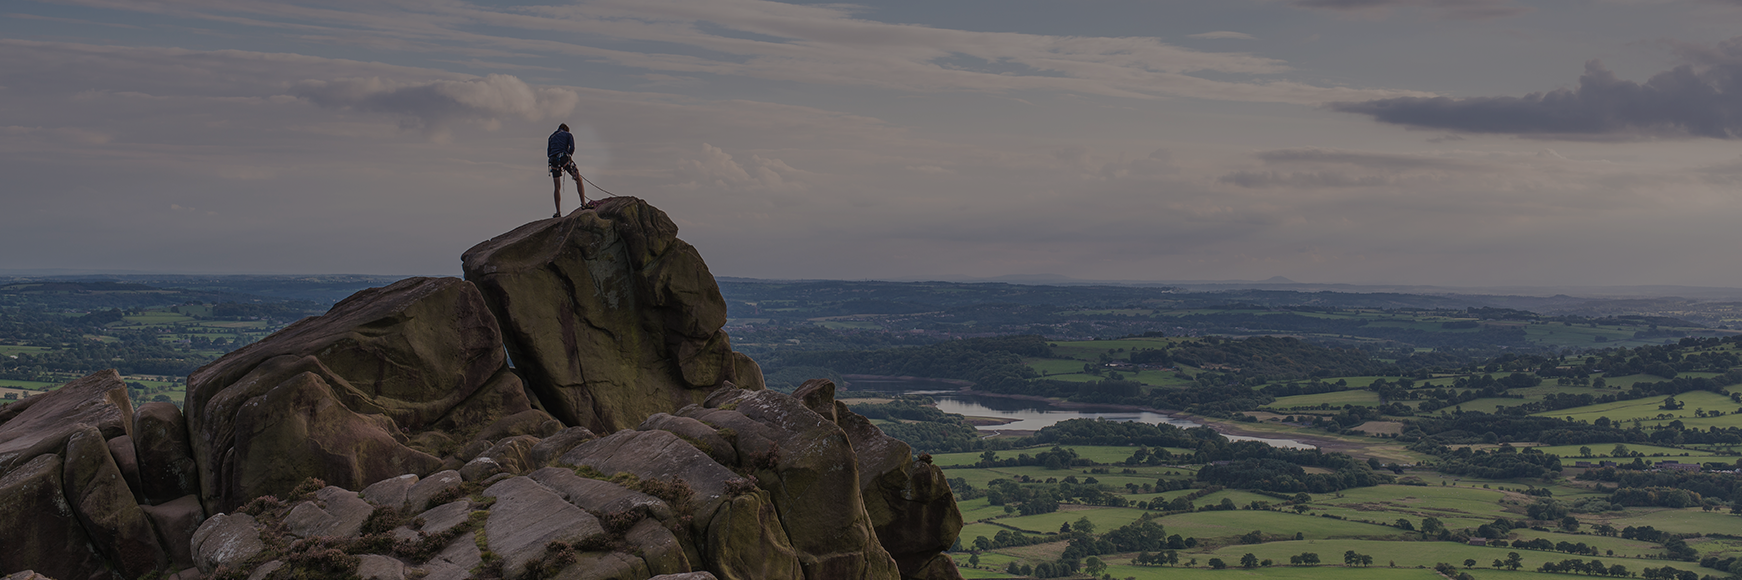 Tackle the rocks in the Peak District banner image